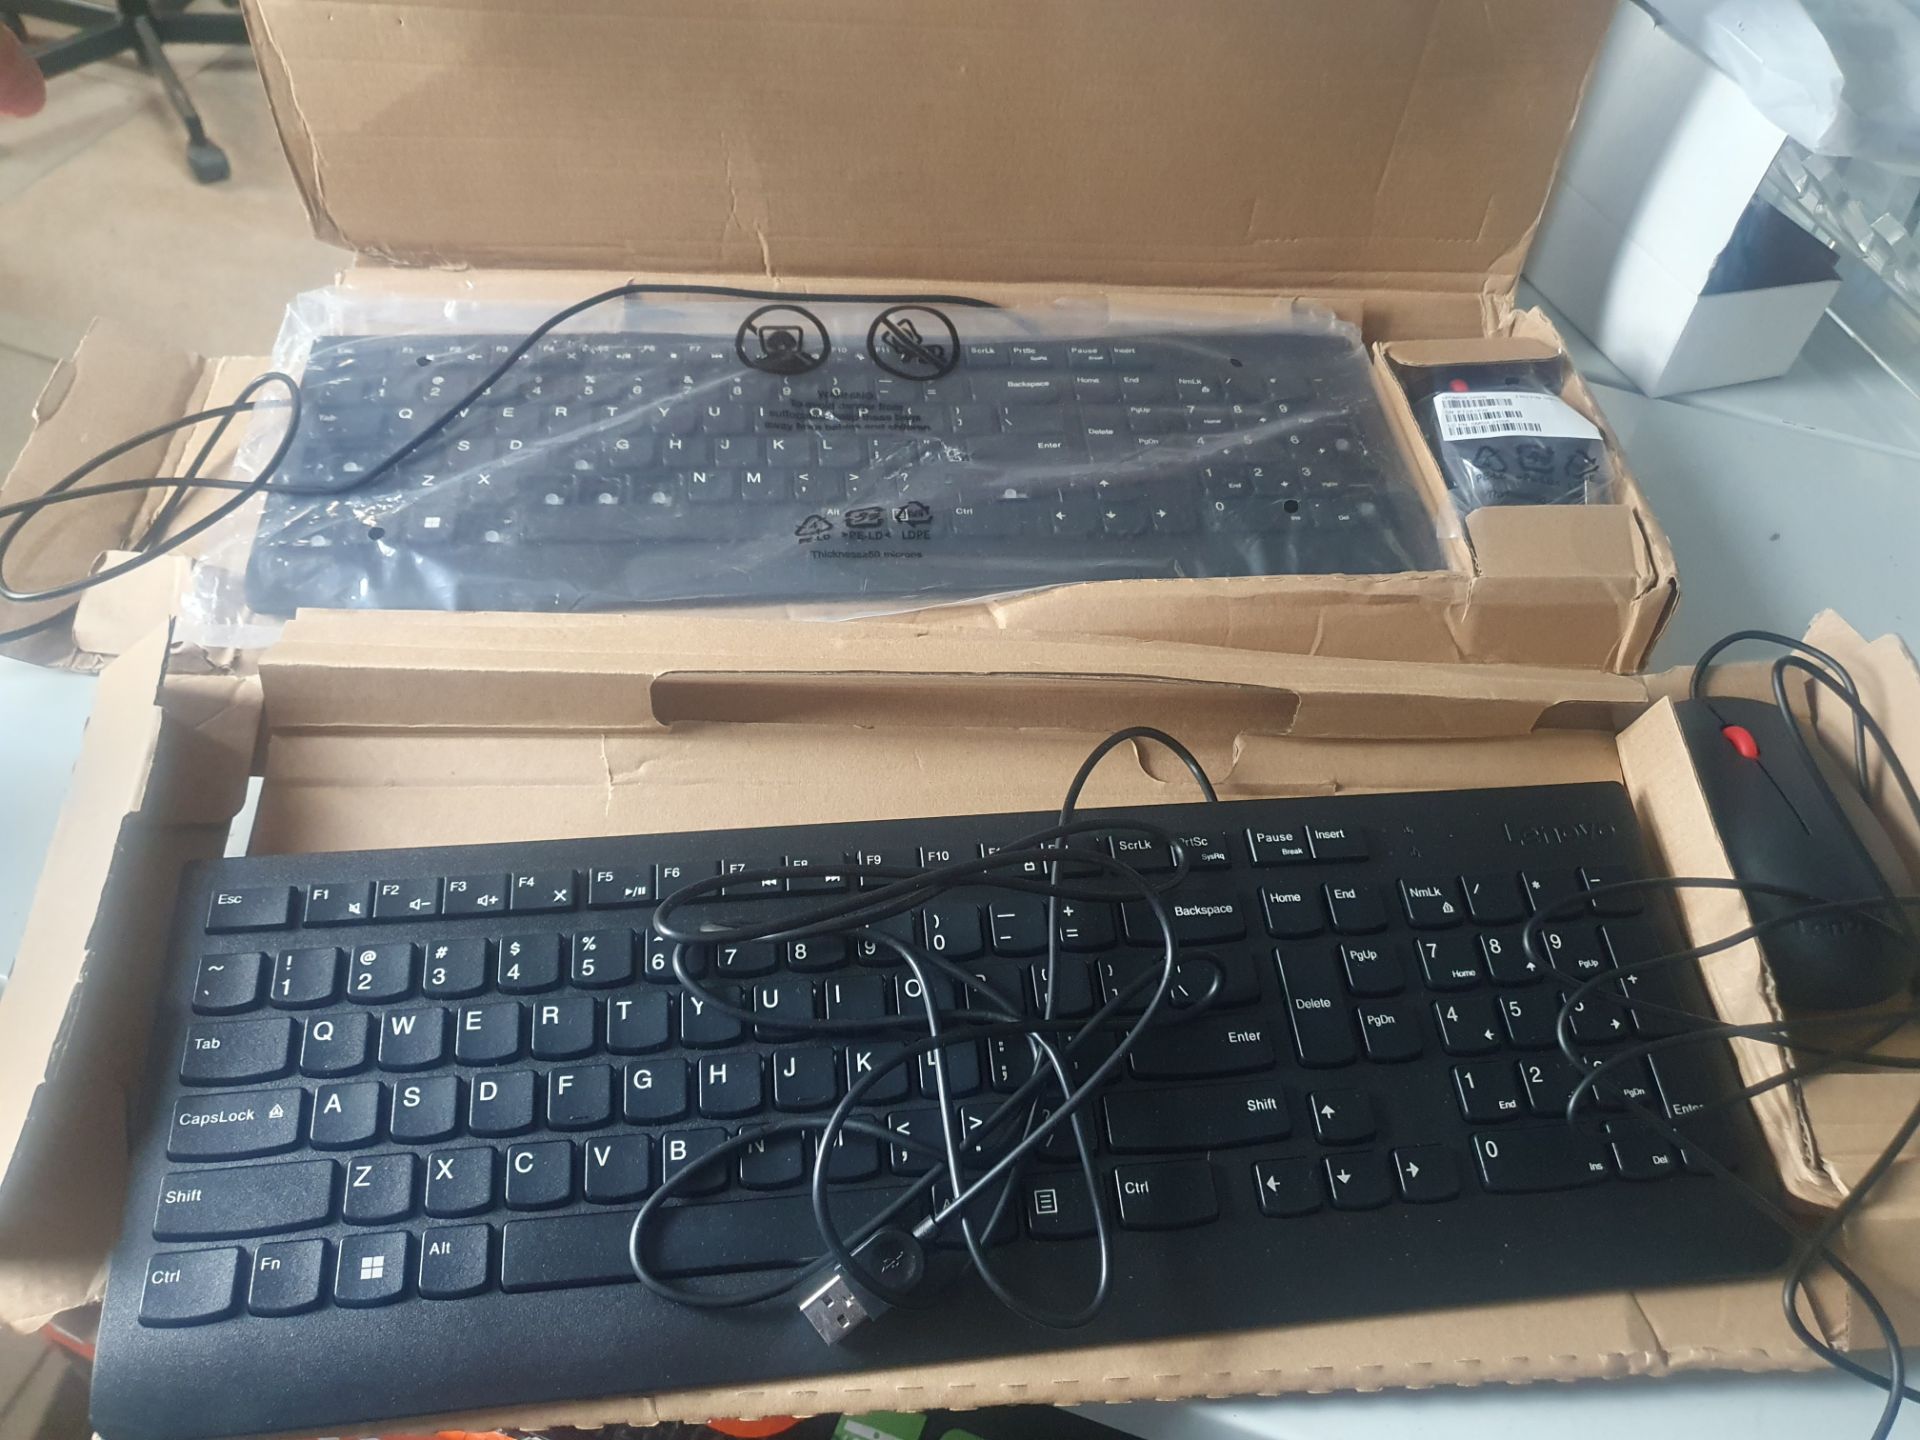 * 2 x Lenovo keyboard and mouse sets